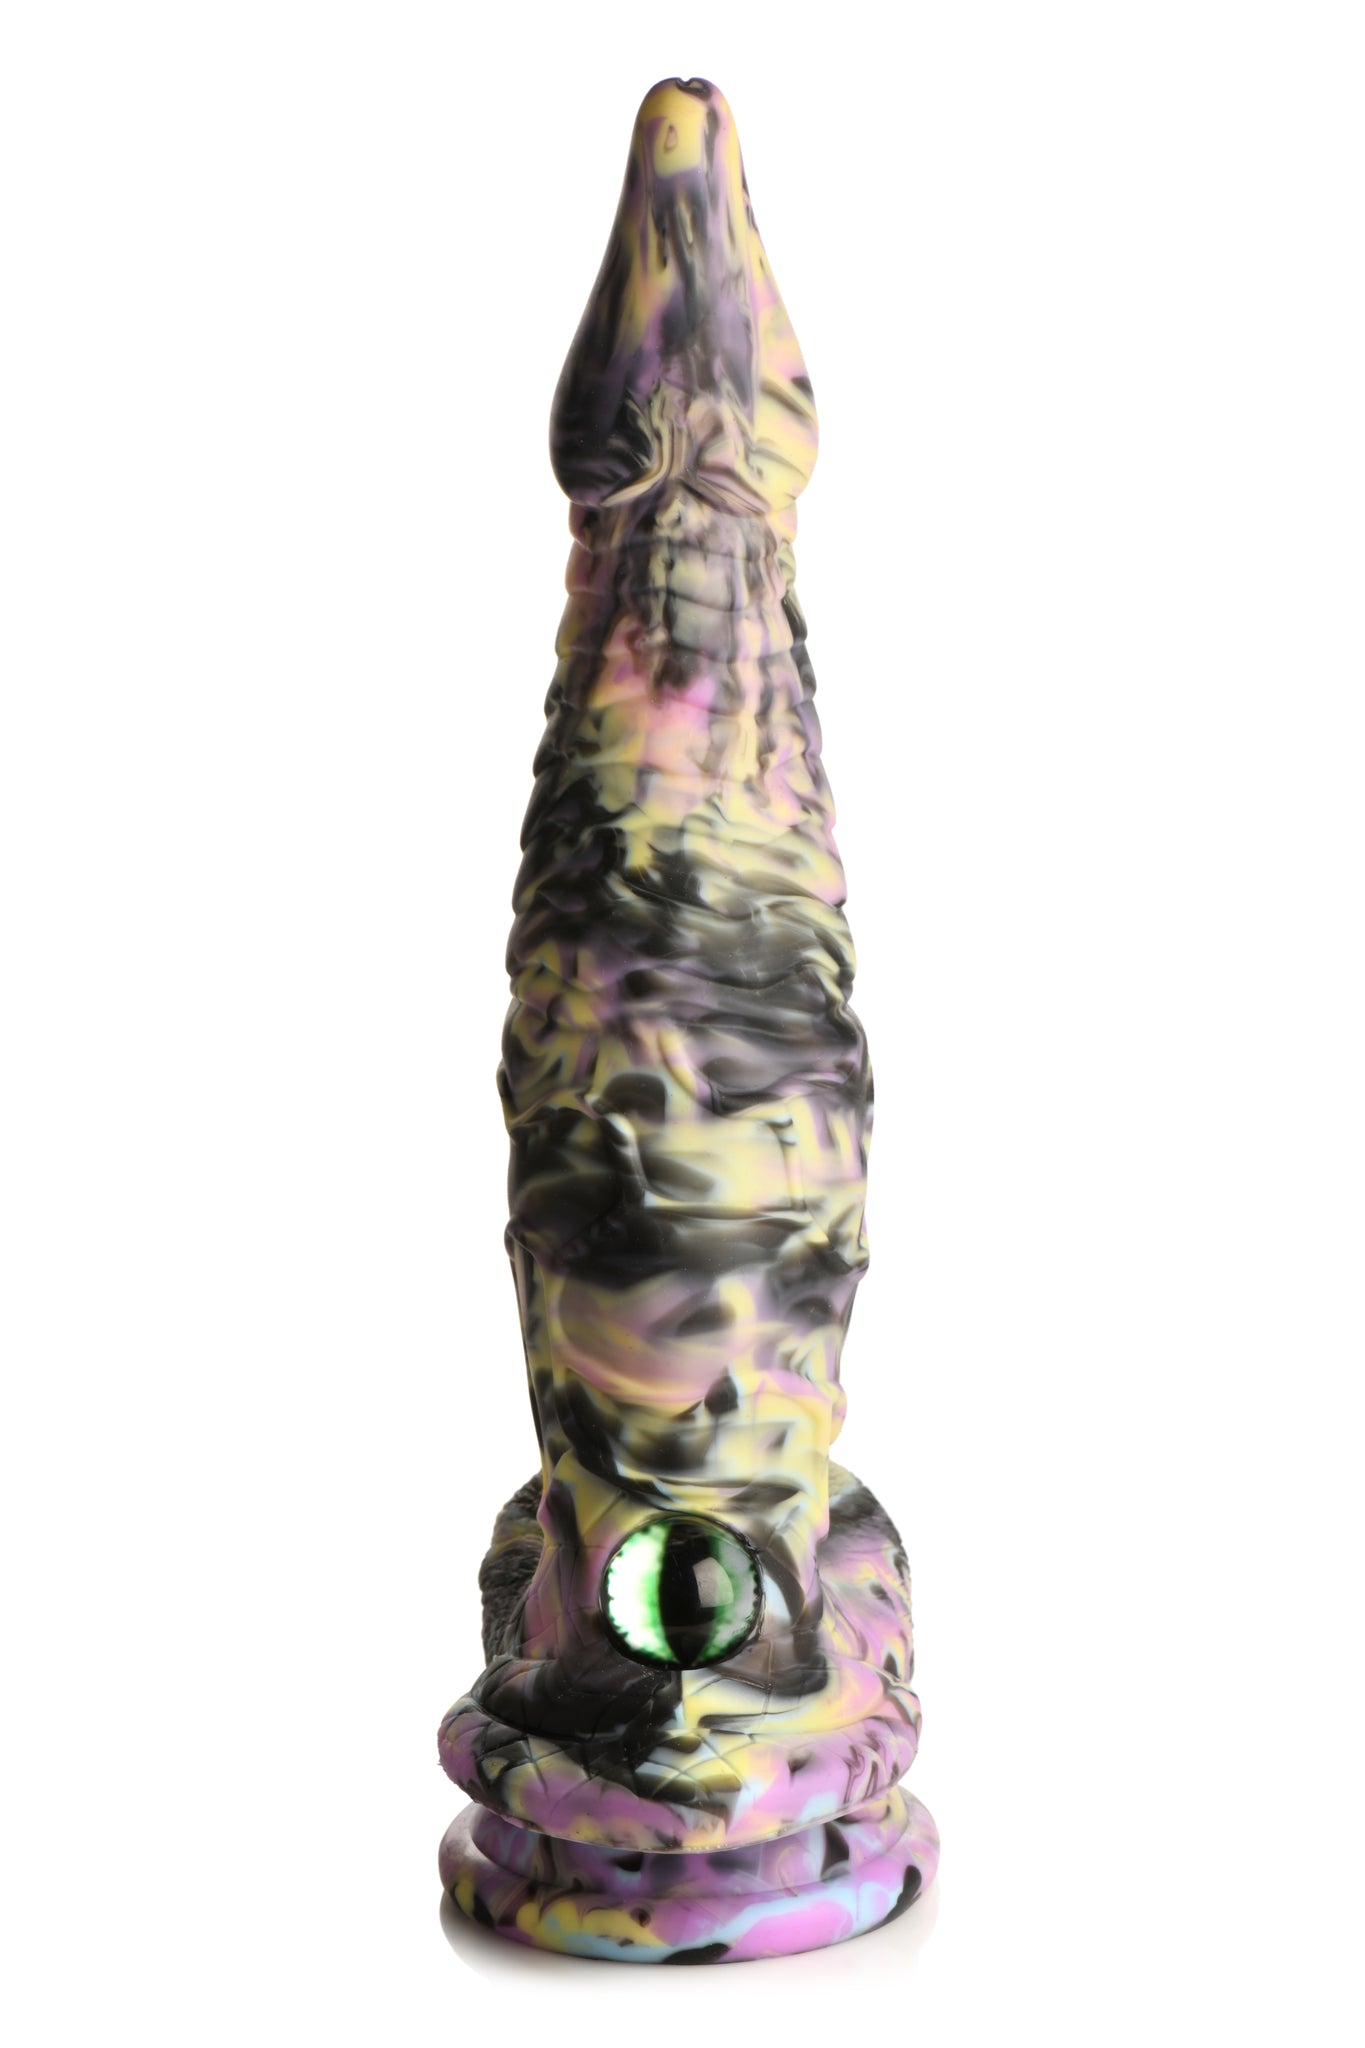 Cyclops Monster Fantasy Dildo made of Silicone by Creature Cocks